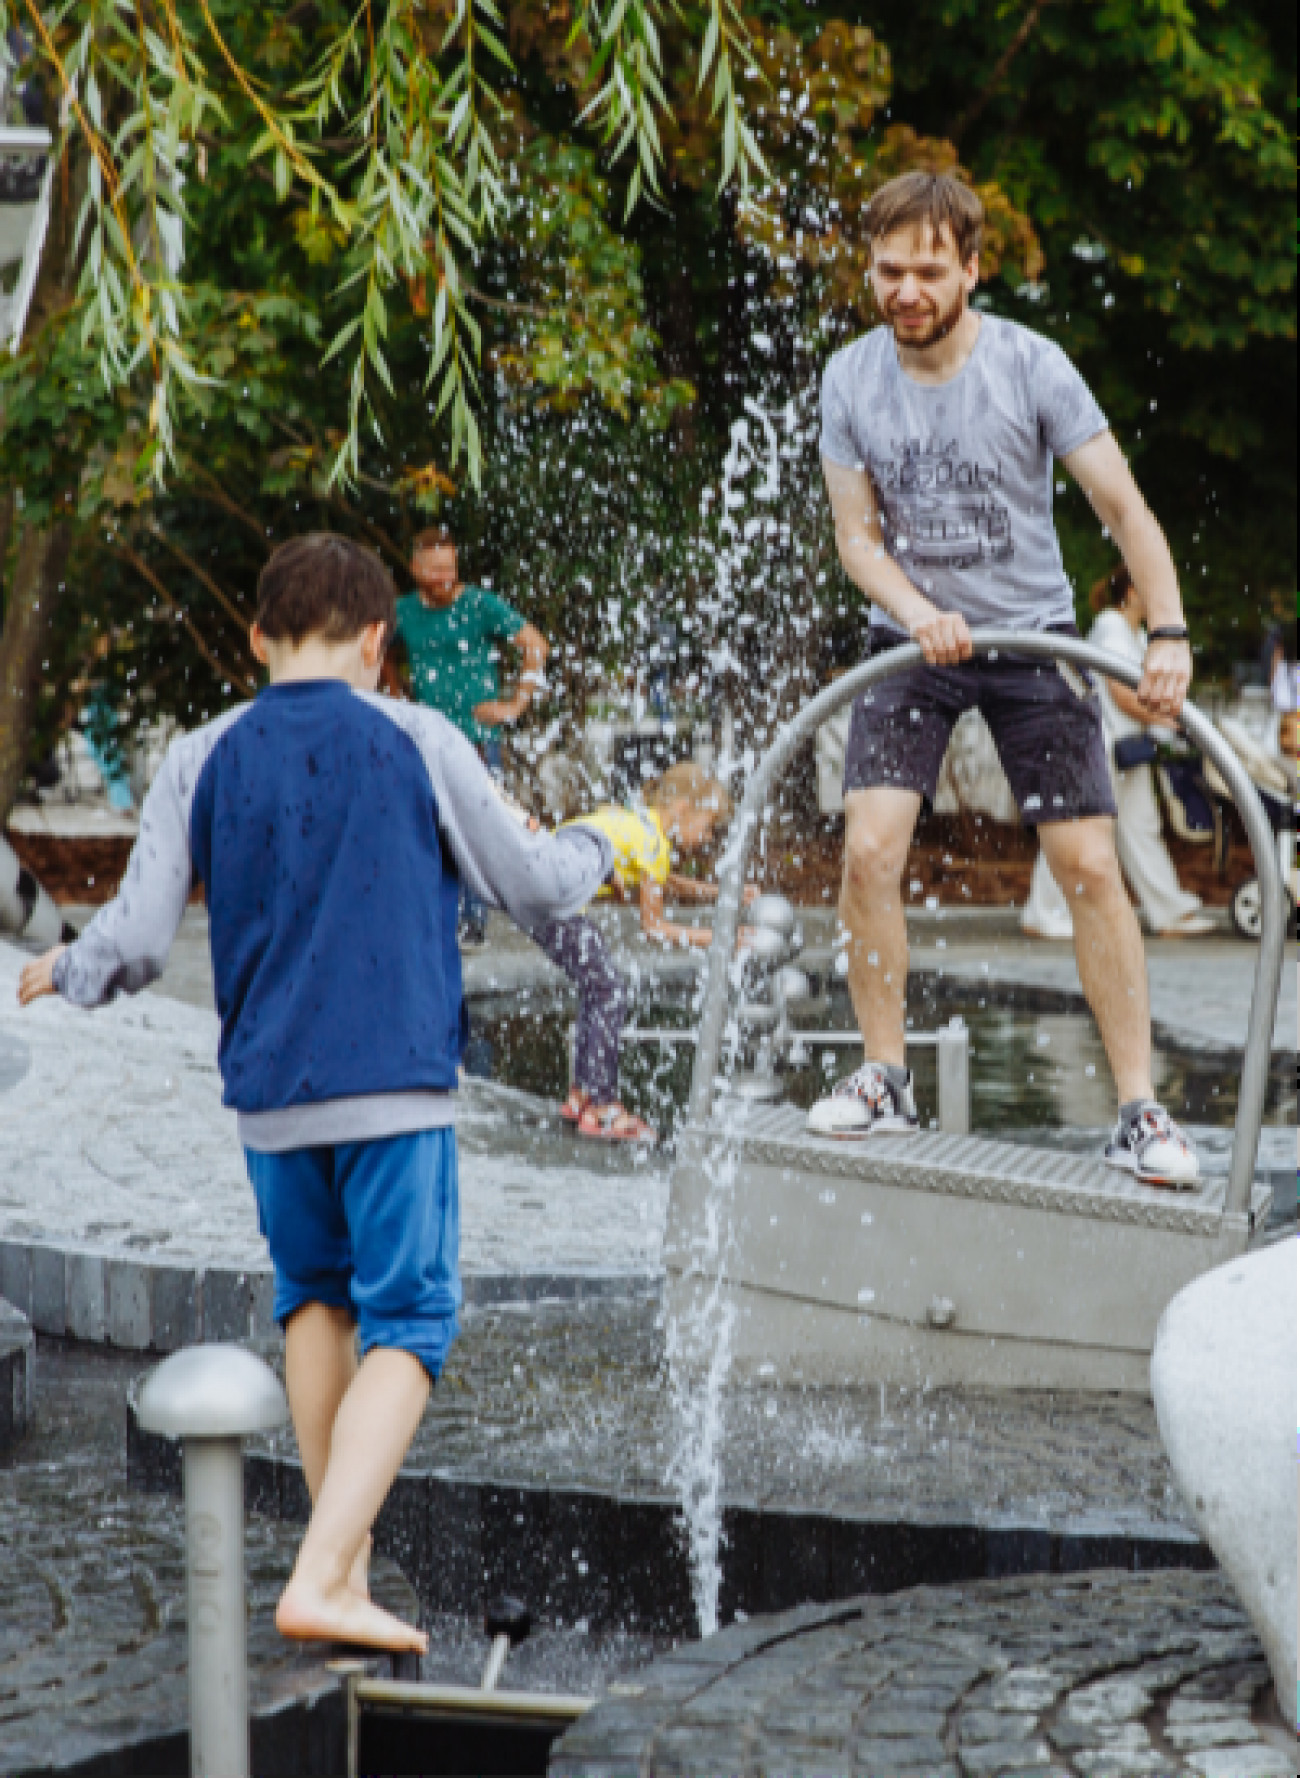 People playing with water in playground